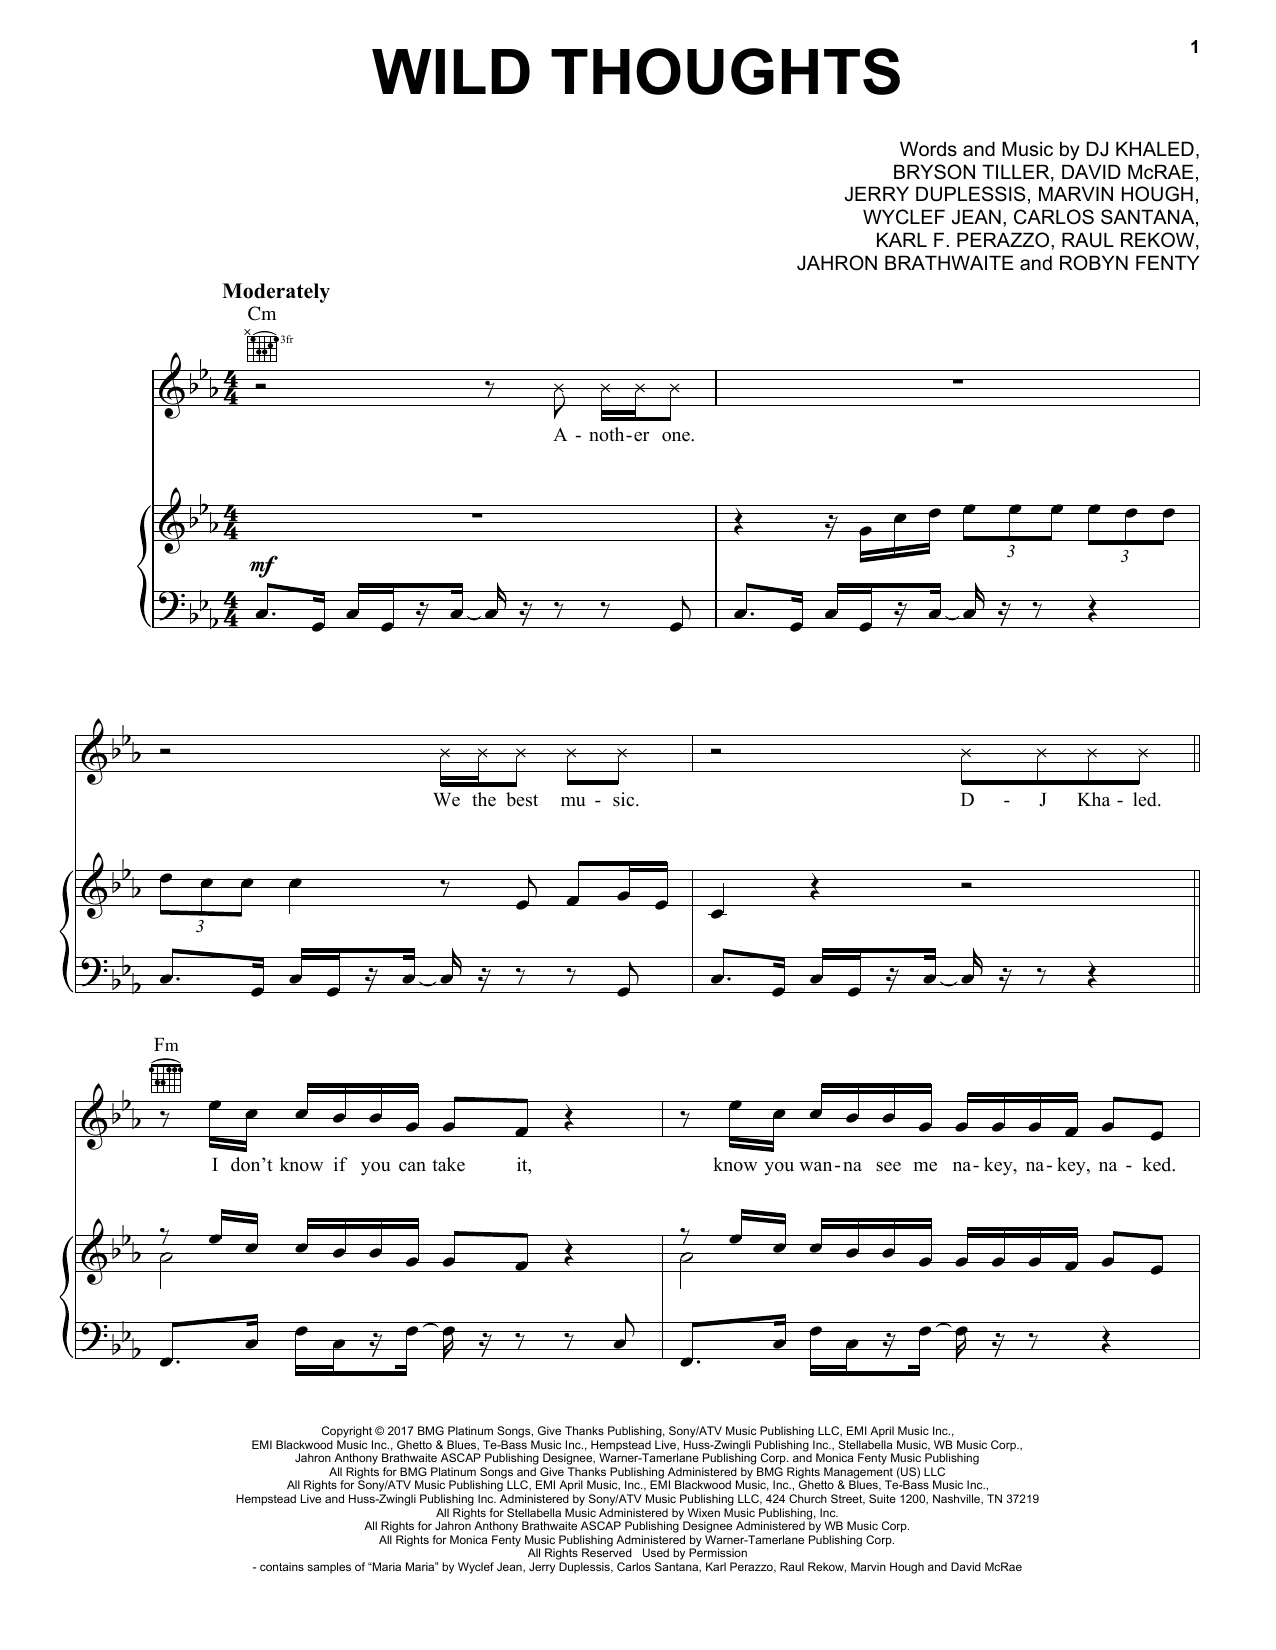 DJ Khaled (feat Rihanna) Wild Thoughts sheet music notes and chords. Download Printable PDF.